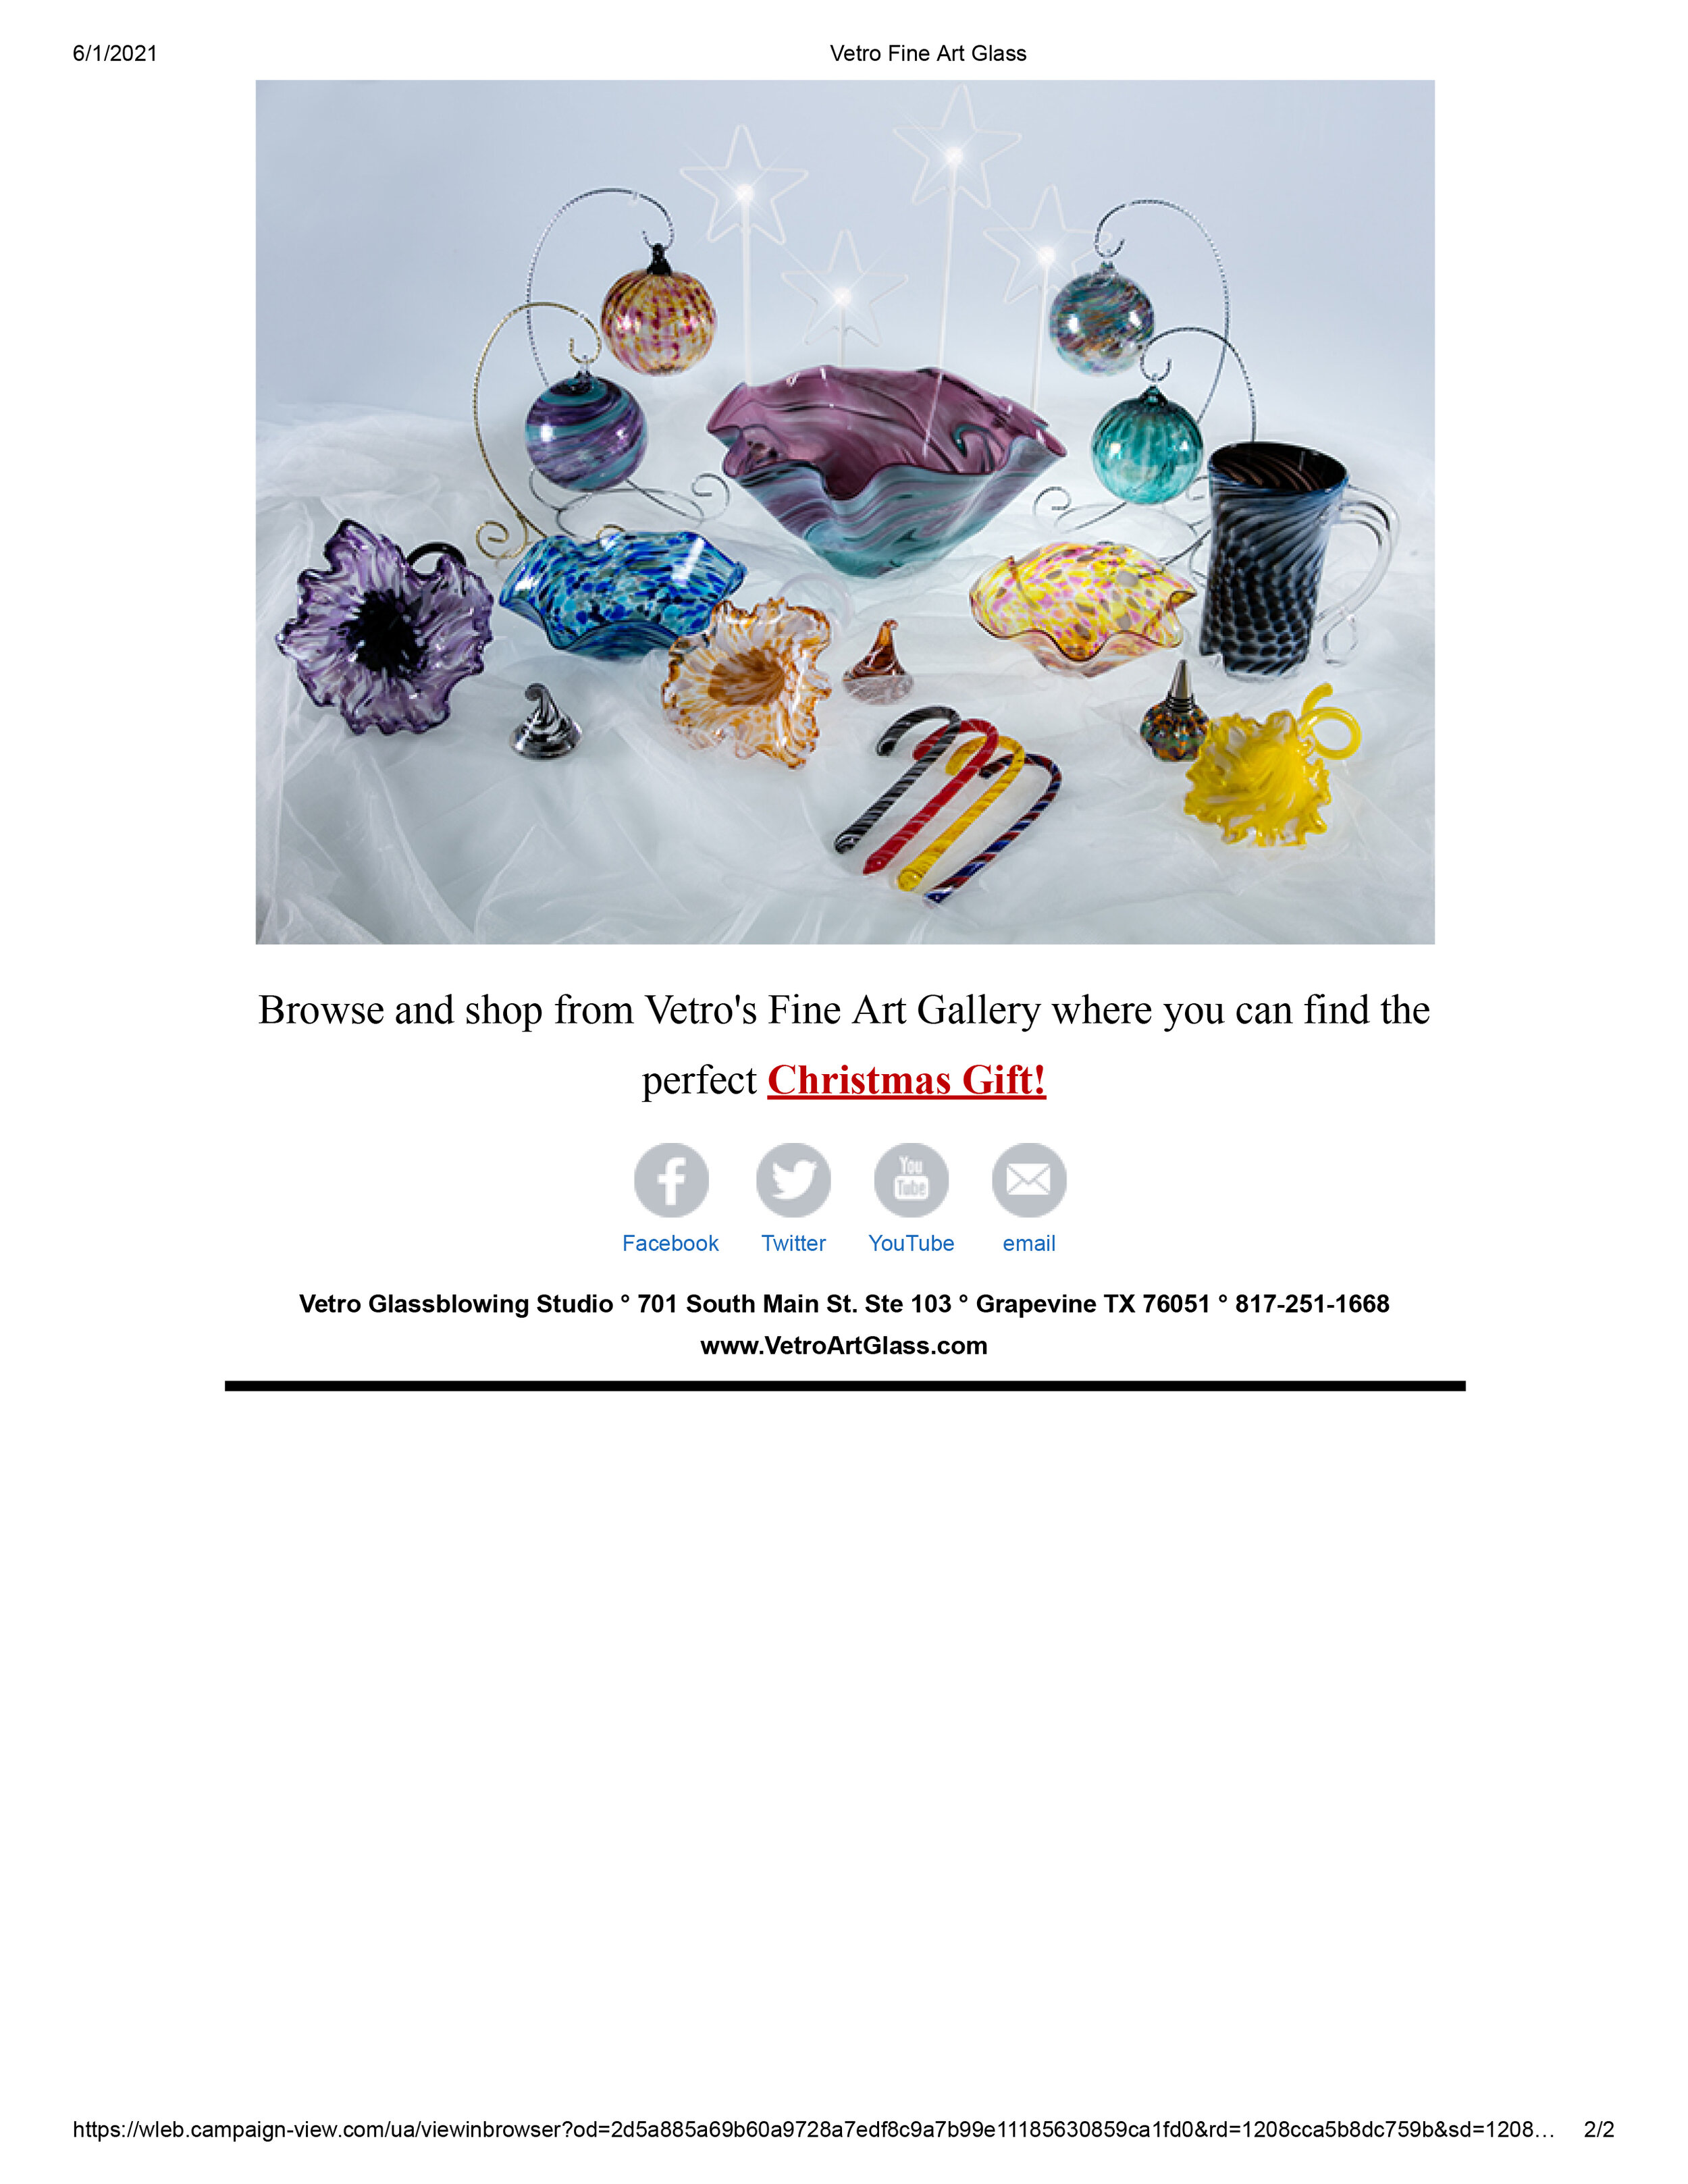 Email Campaigns -Vetro Glassblowing Studio - Things are HEATING UP this holiday season-angel-2.jpg